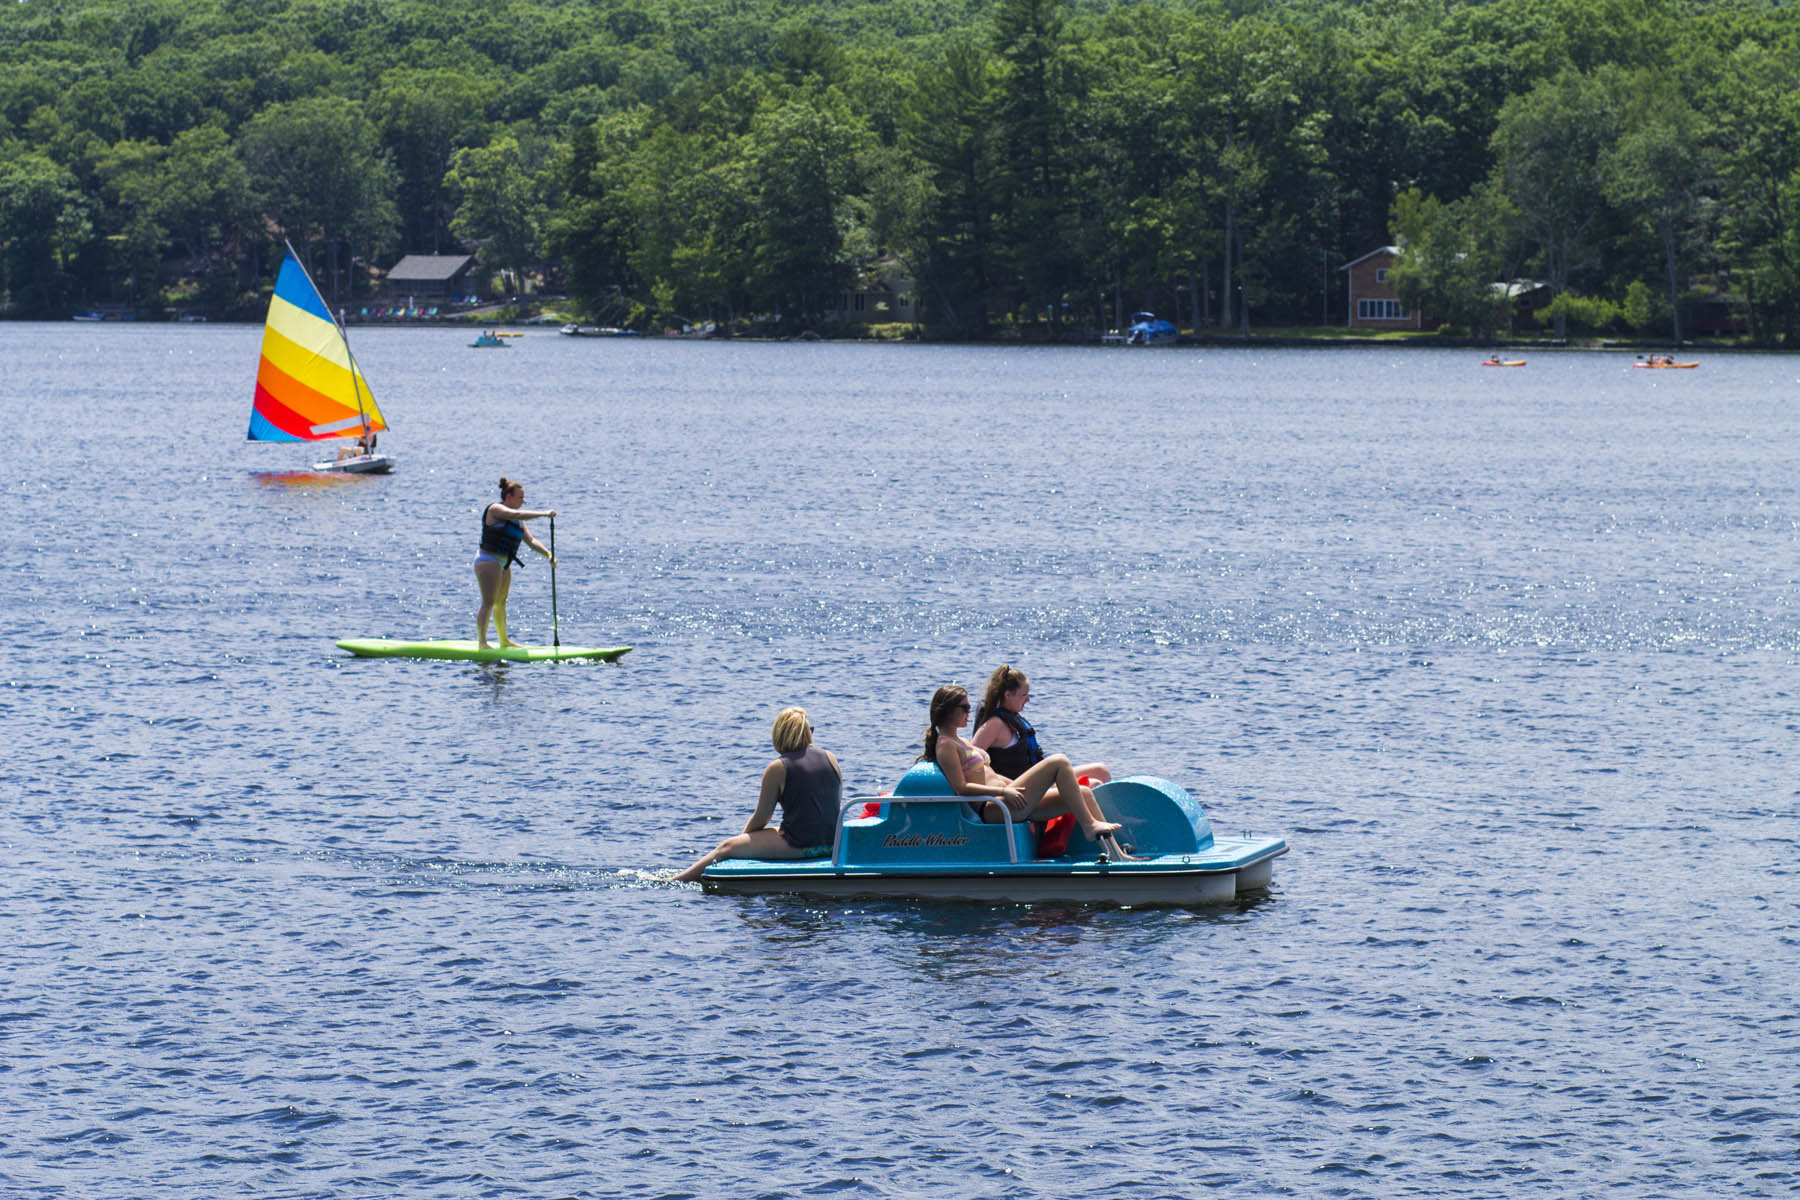 Guests in a dinghy, on a standup paddleboard and in a paddleboat.